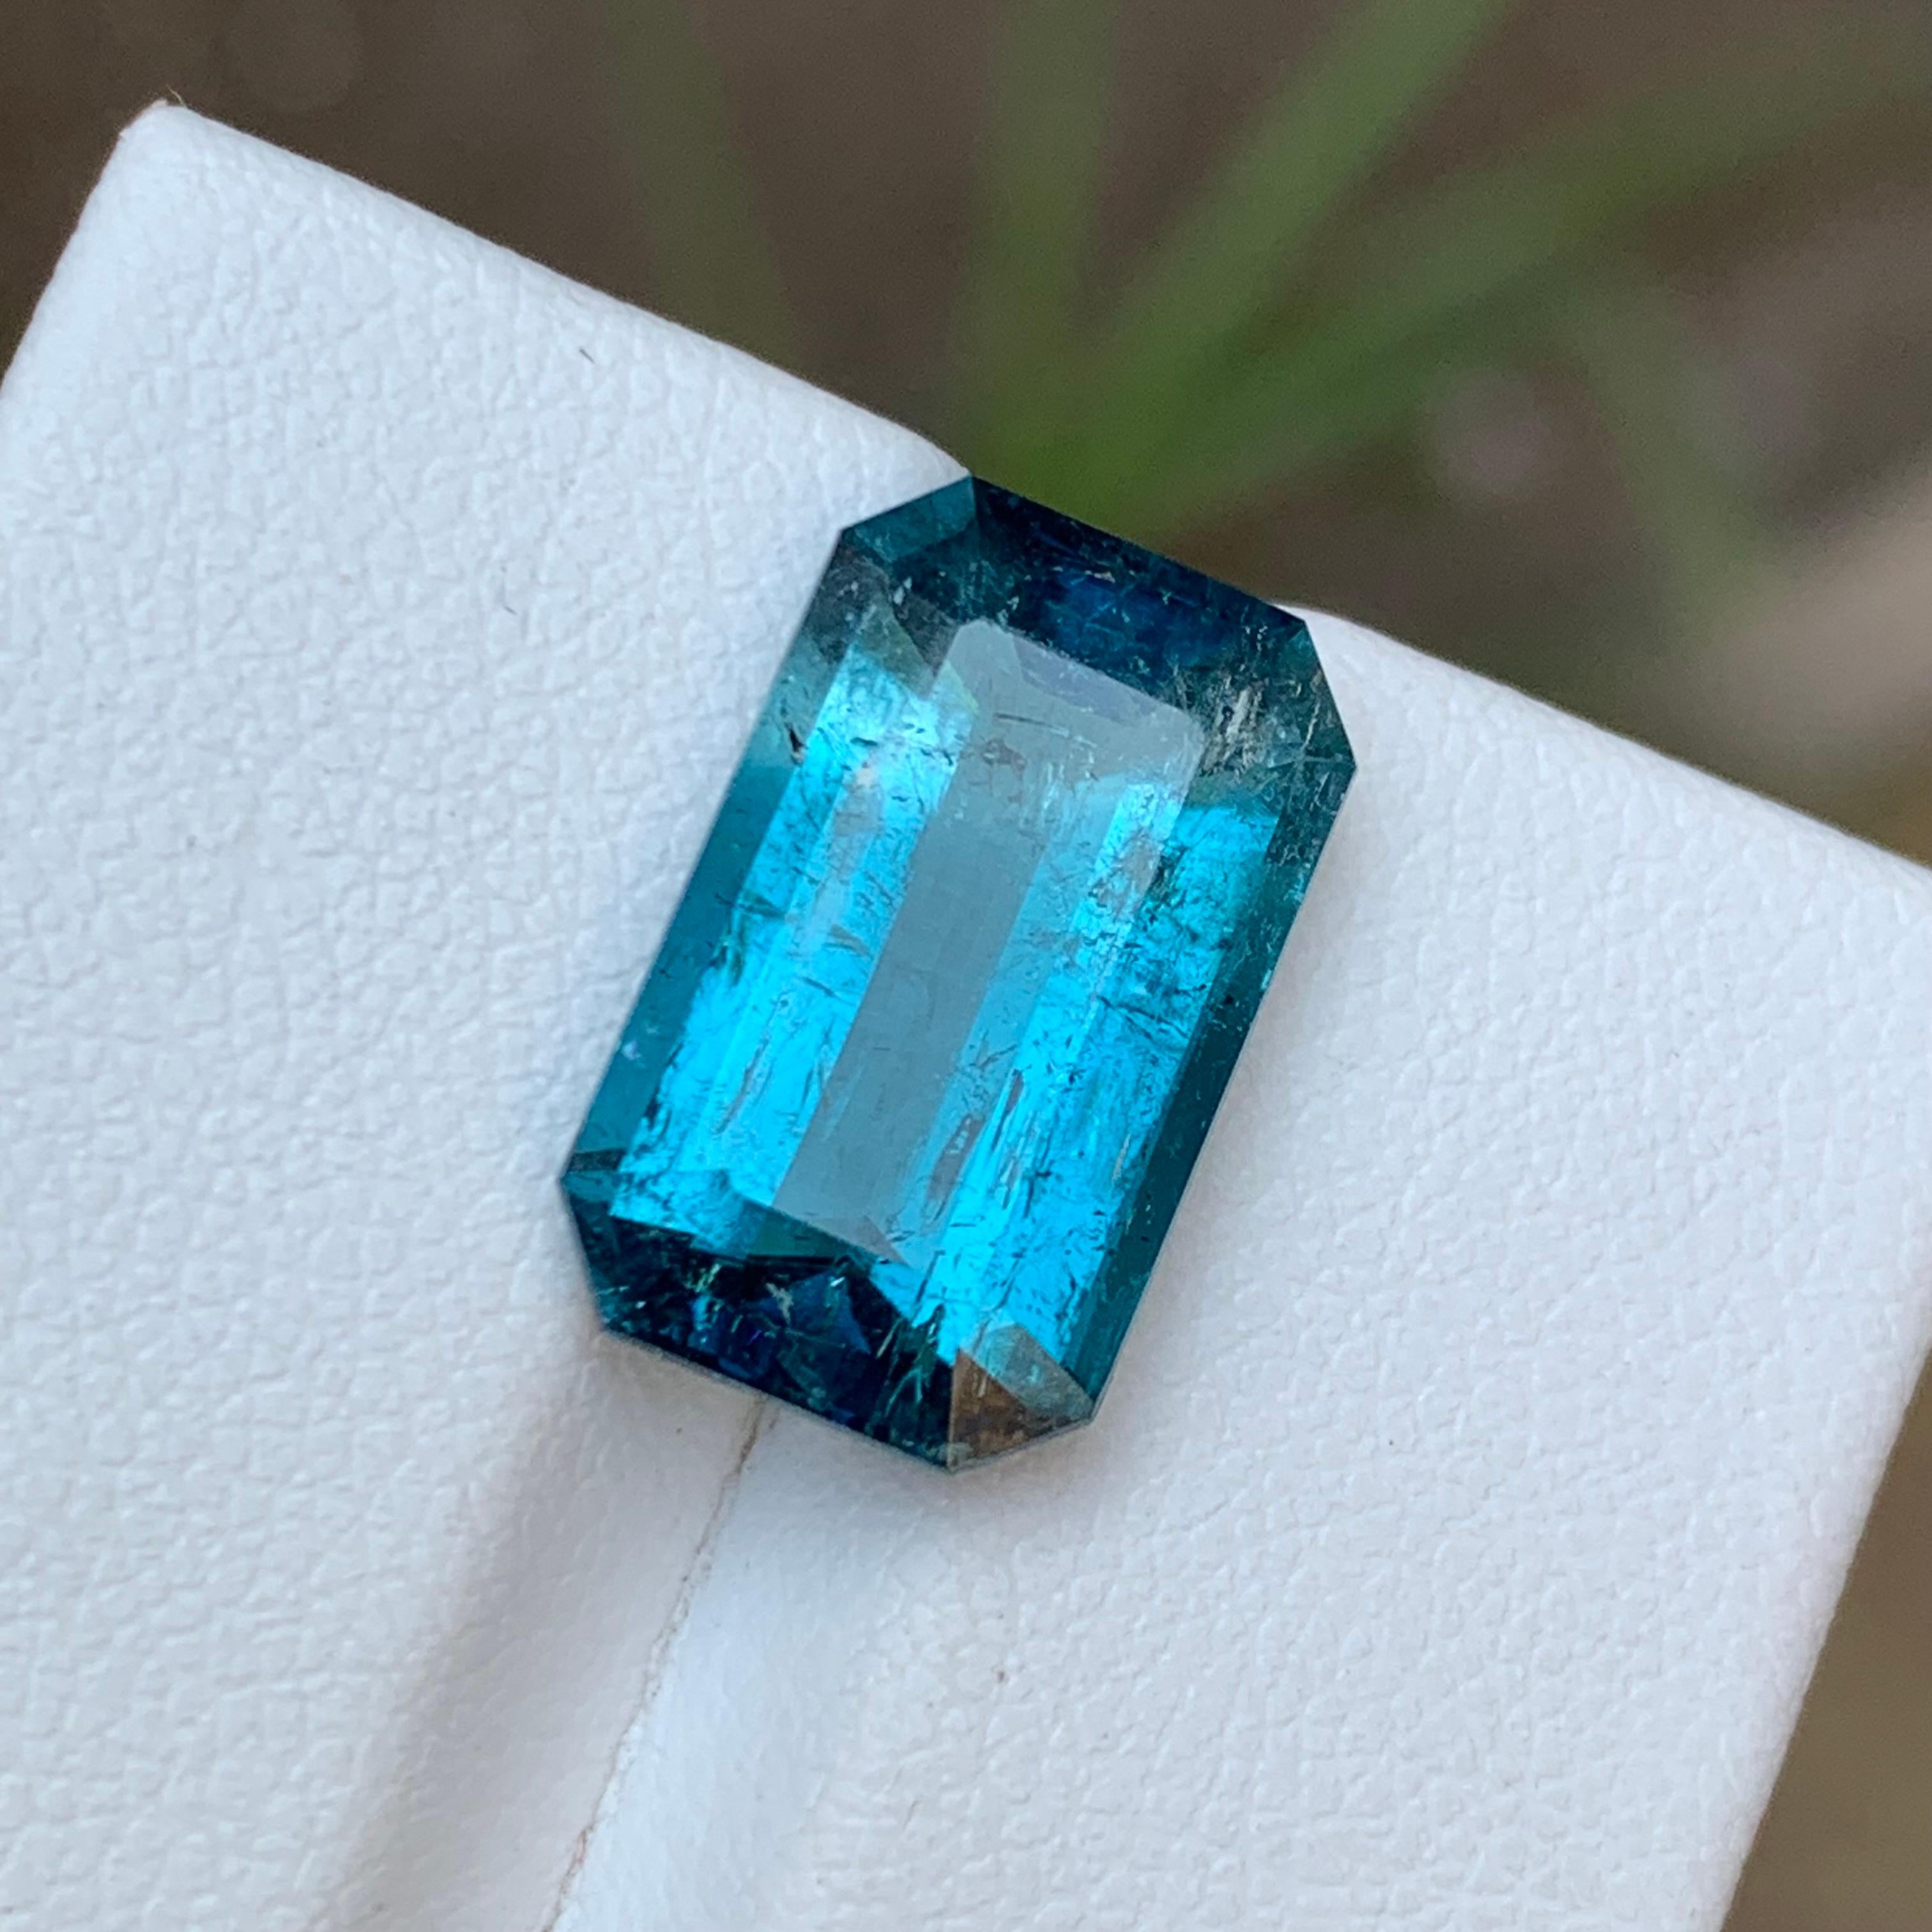 GEMSTONE TYPE: Tourmaline
PIECE(S): 1
WEIGHT: 7.20 Carats
SHAPE: Emerald
SIZE (MM): 15.36 x 9.47 x 6.07
COLOR: Rich Electric Blue
CLARITY: Moderately Included 
TREATMENT: None
ORIGIN: Afghanistan
CERTIFICATE: On demand

Indulge in the ethereal